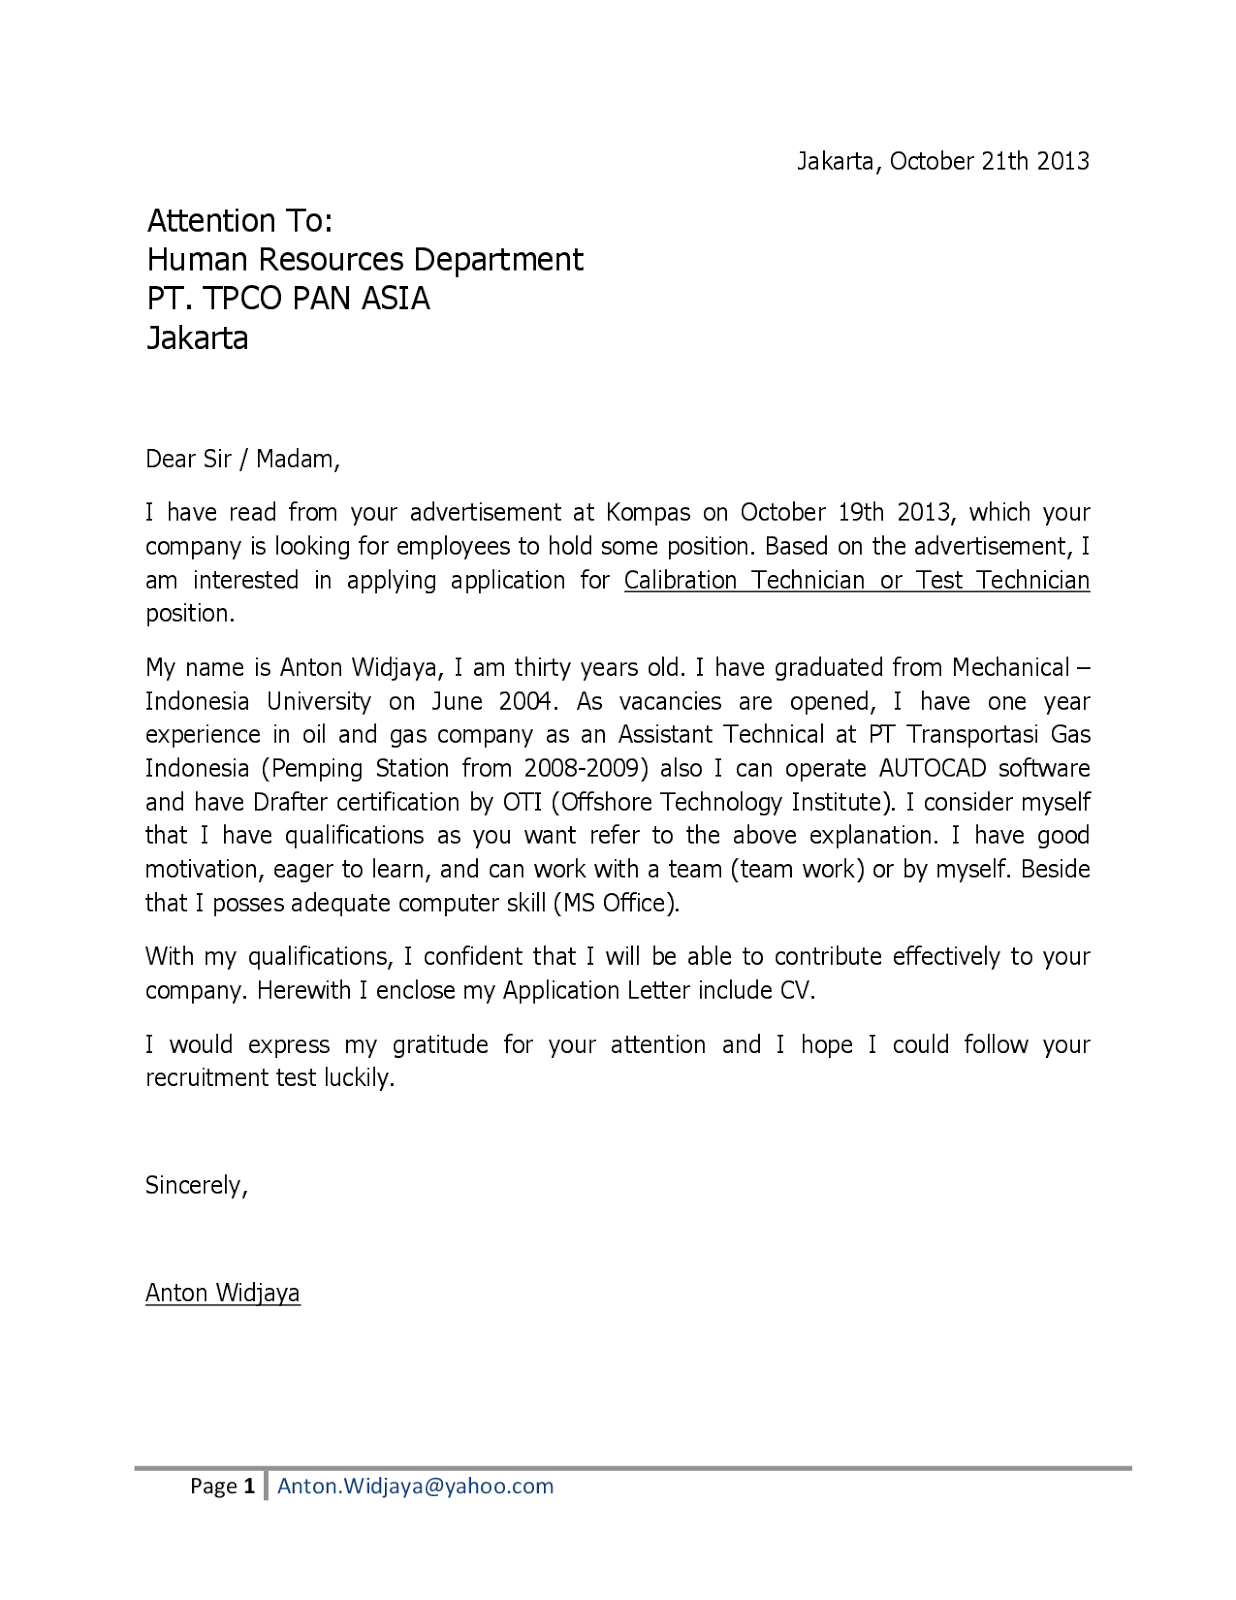 email cover letter for fresh graduate